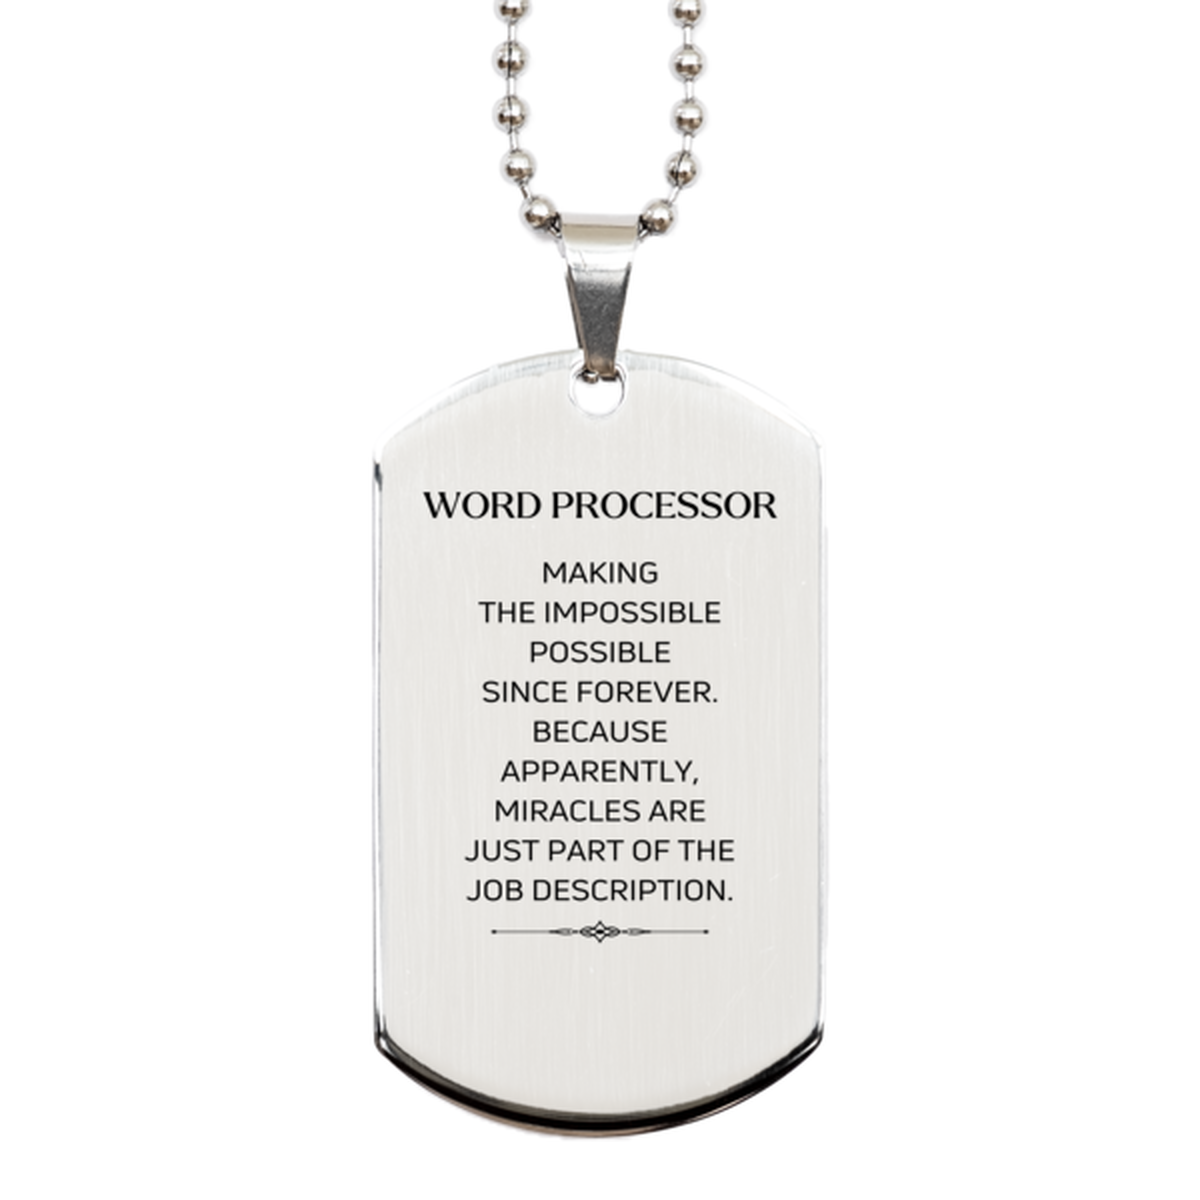 Funny Word Processor Gifts, Miracles are just part of the job description, Inspirational Birthday Silver Dog Tag For Word Processor, Men, Women, Coworkers, Friends, Boss